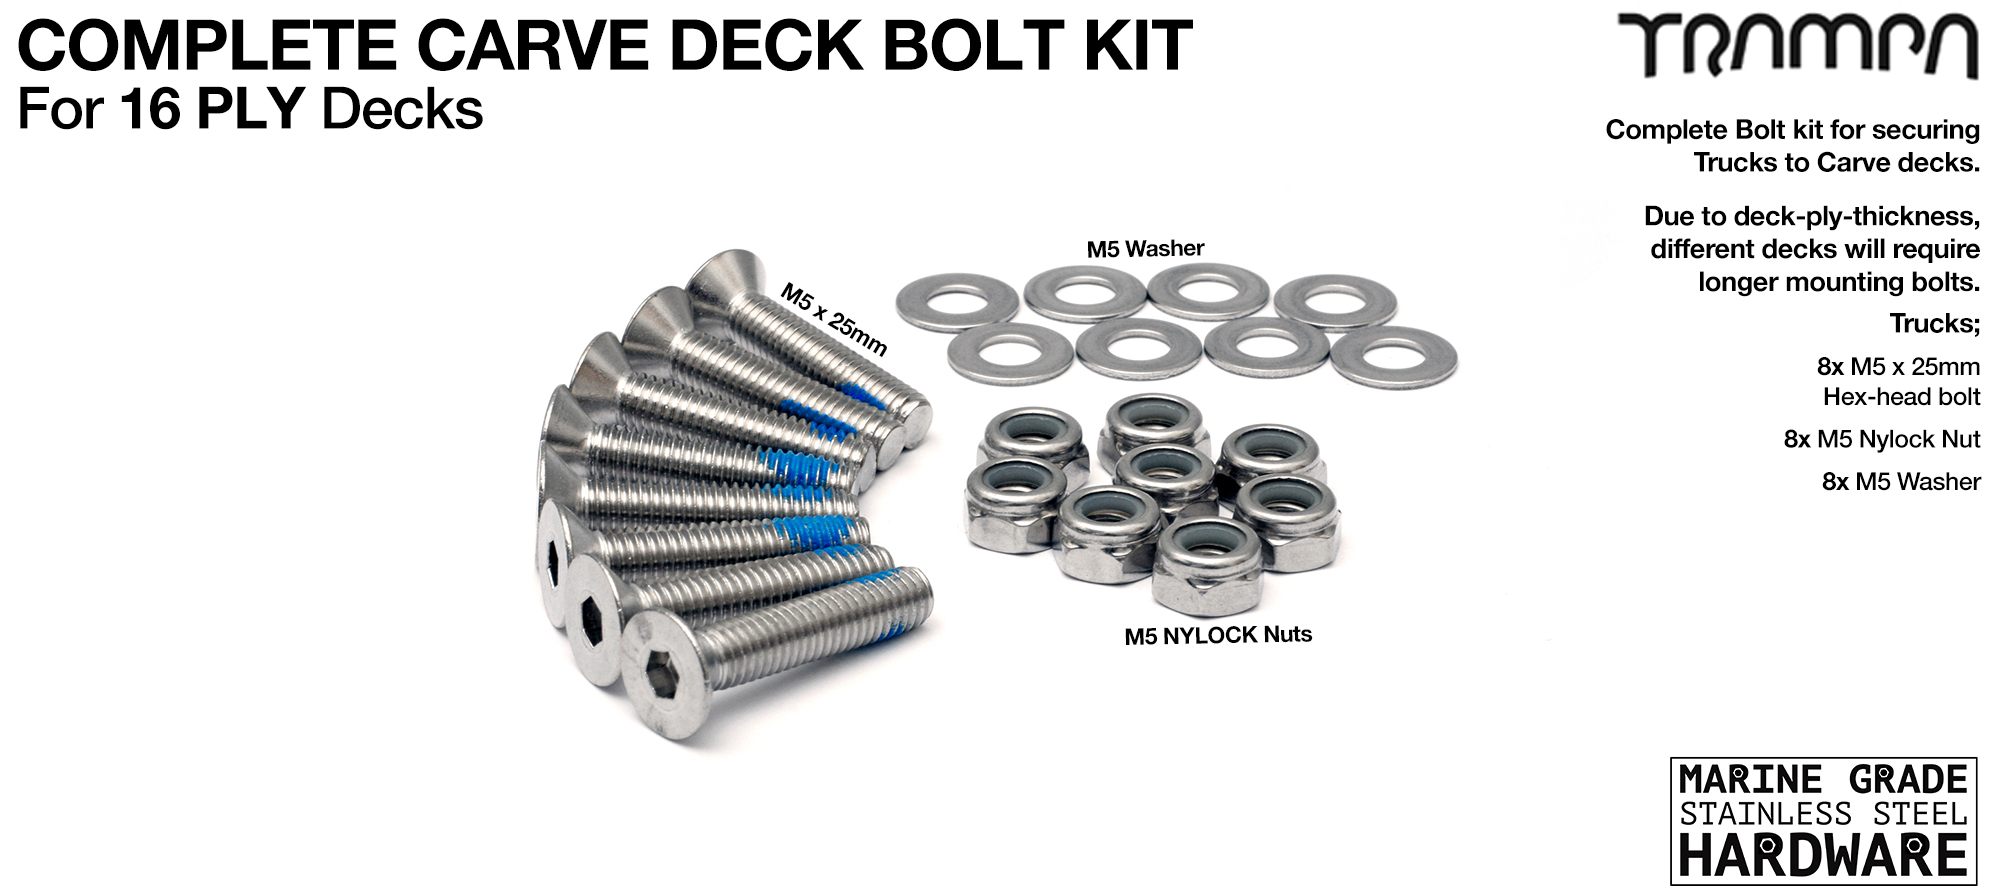 25mm Marine grade Stainless Steel Countersunk Bolt Kit - fixes Mini Spring Trucks to 16ply Carve Decks